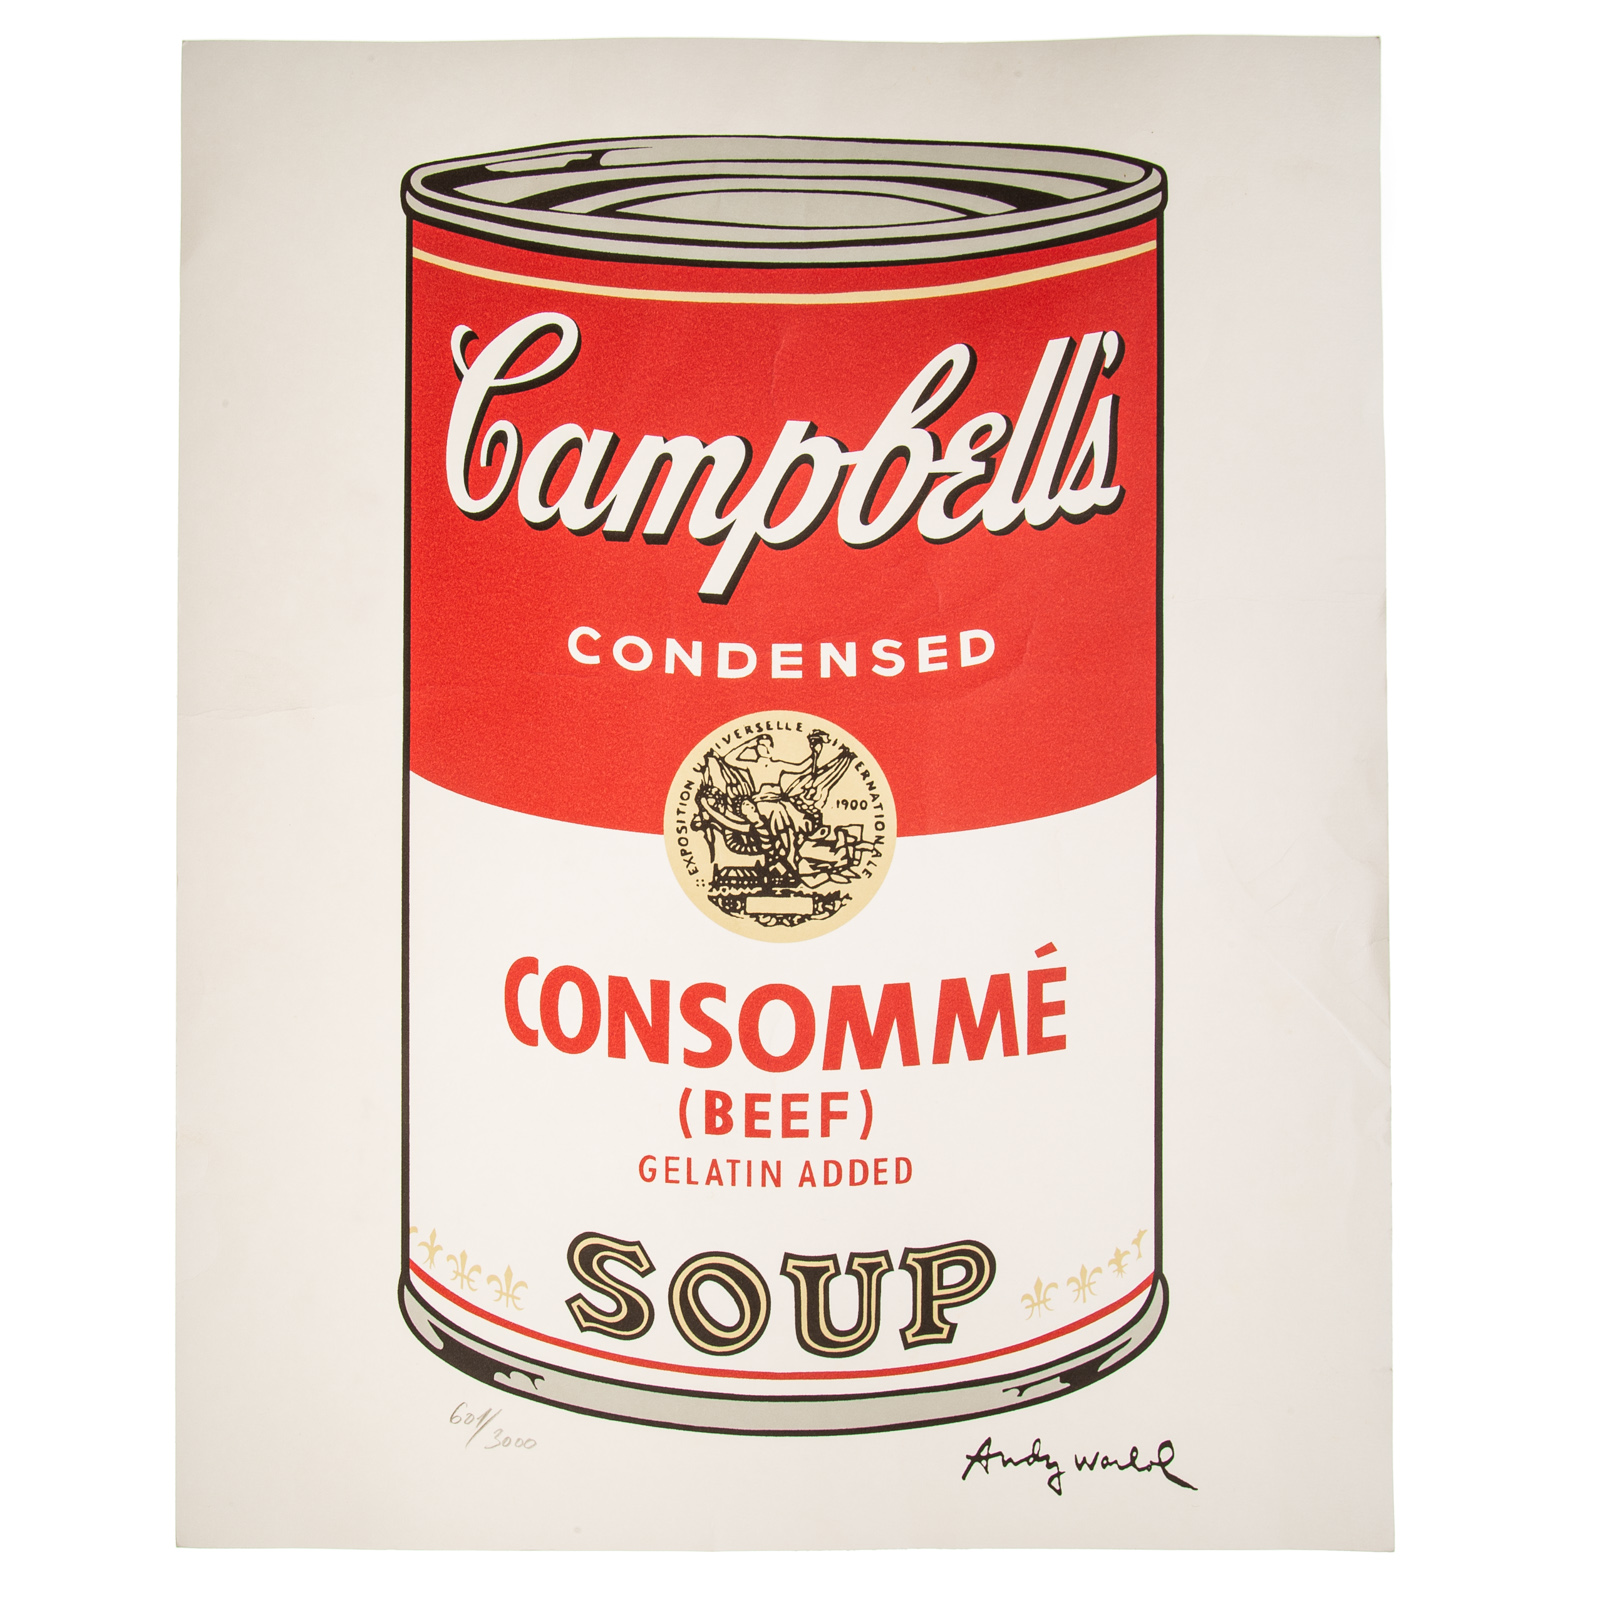 AFTER ANDY WARHOL. CAMPBELL SOUP CONSOMME,